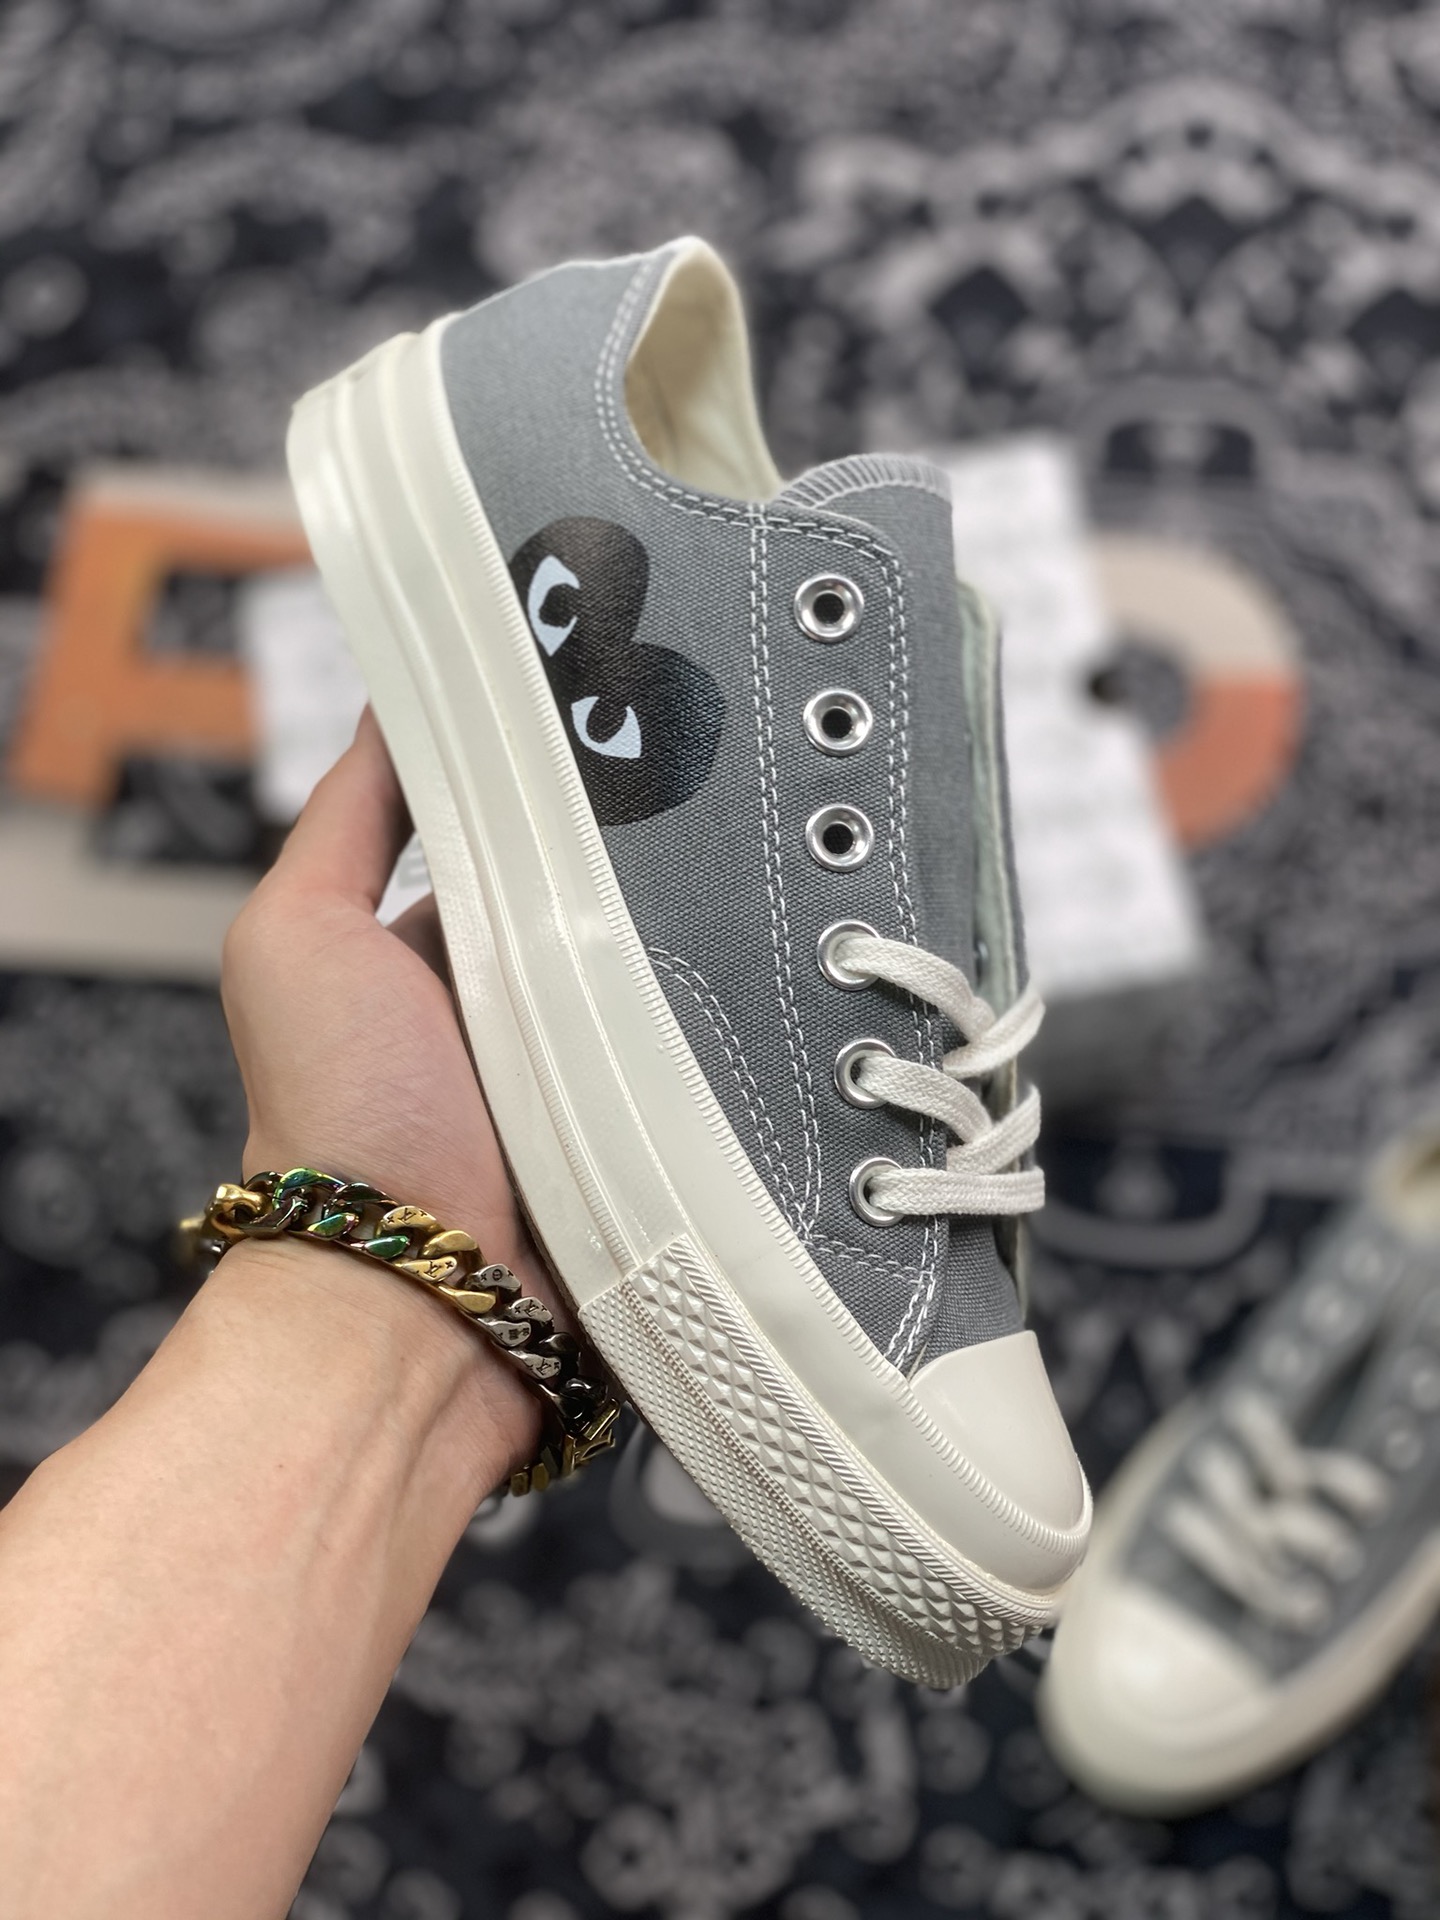 converse cdg play low